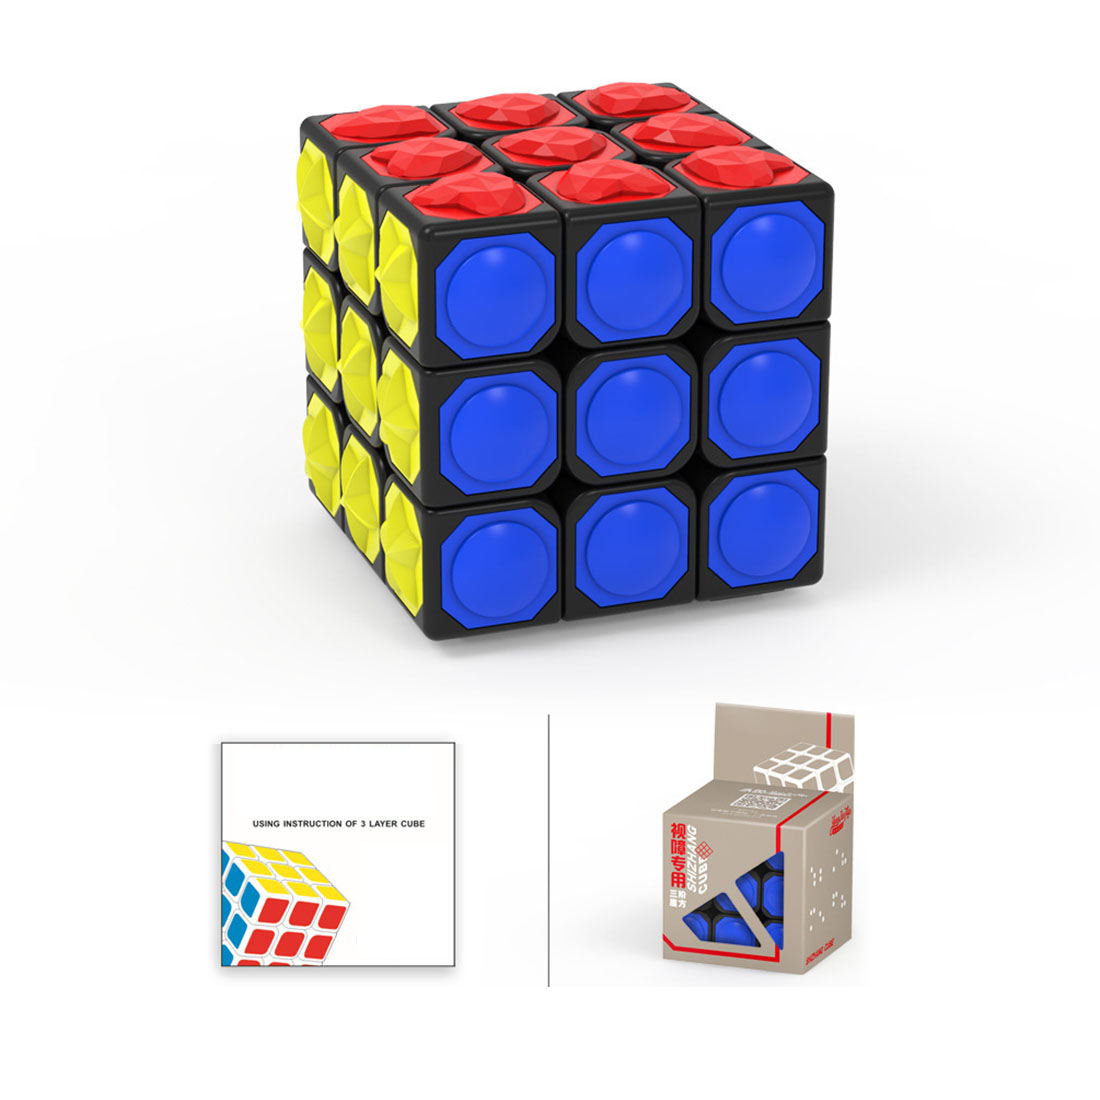 YJ Shizhang 3x3x3 for blind people 